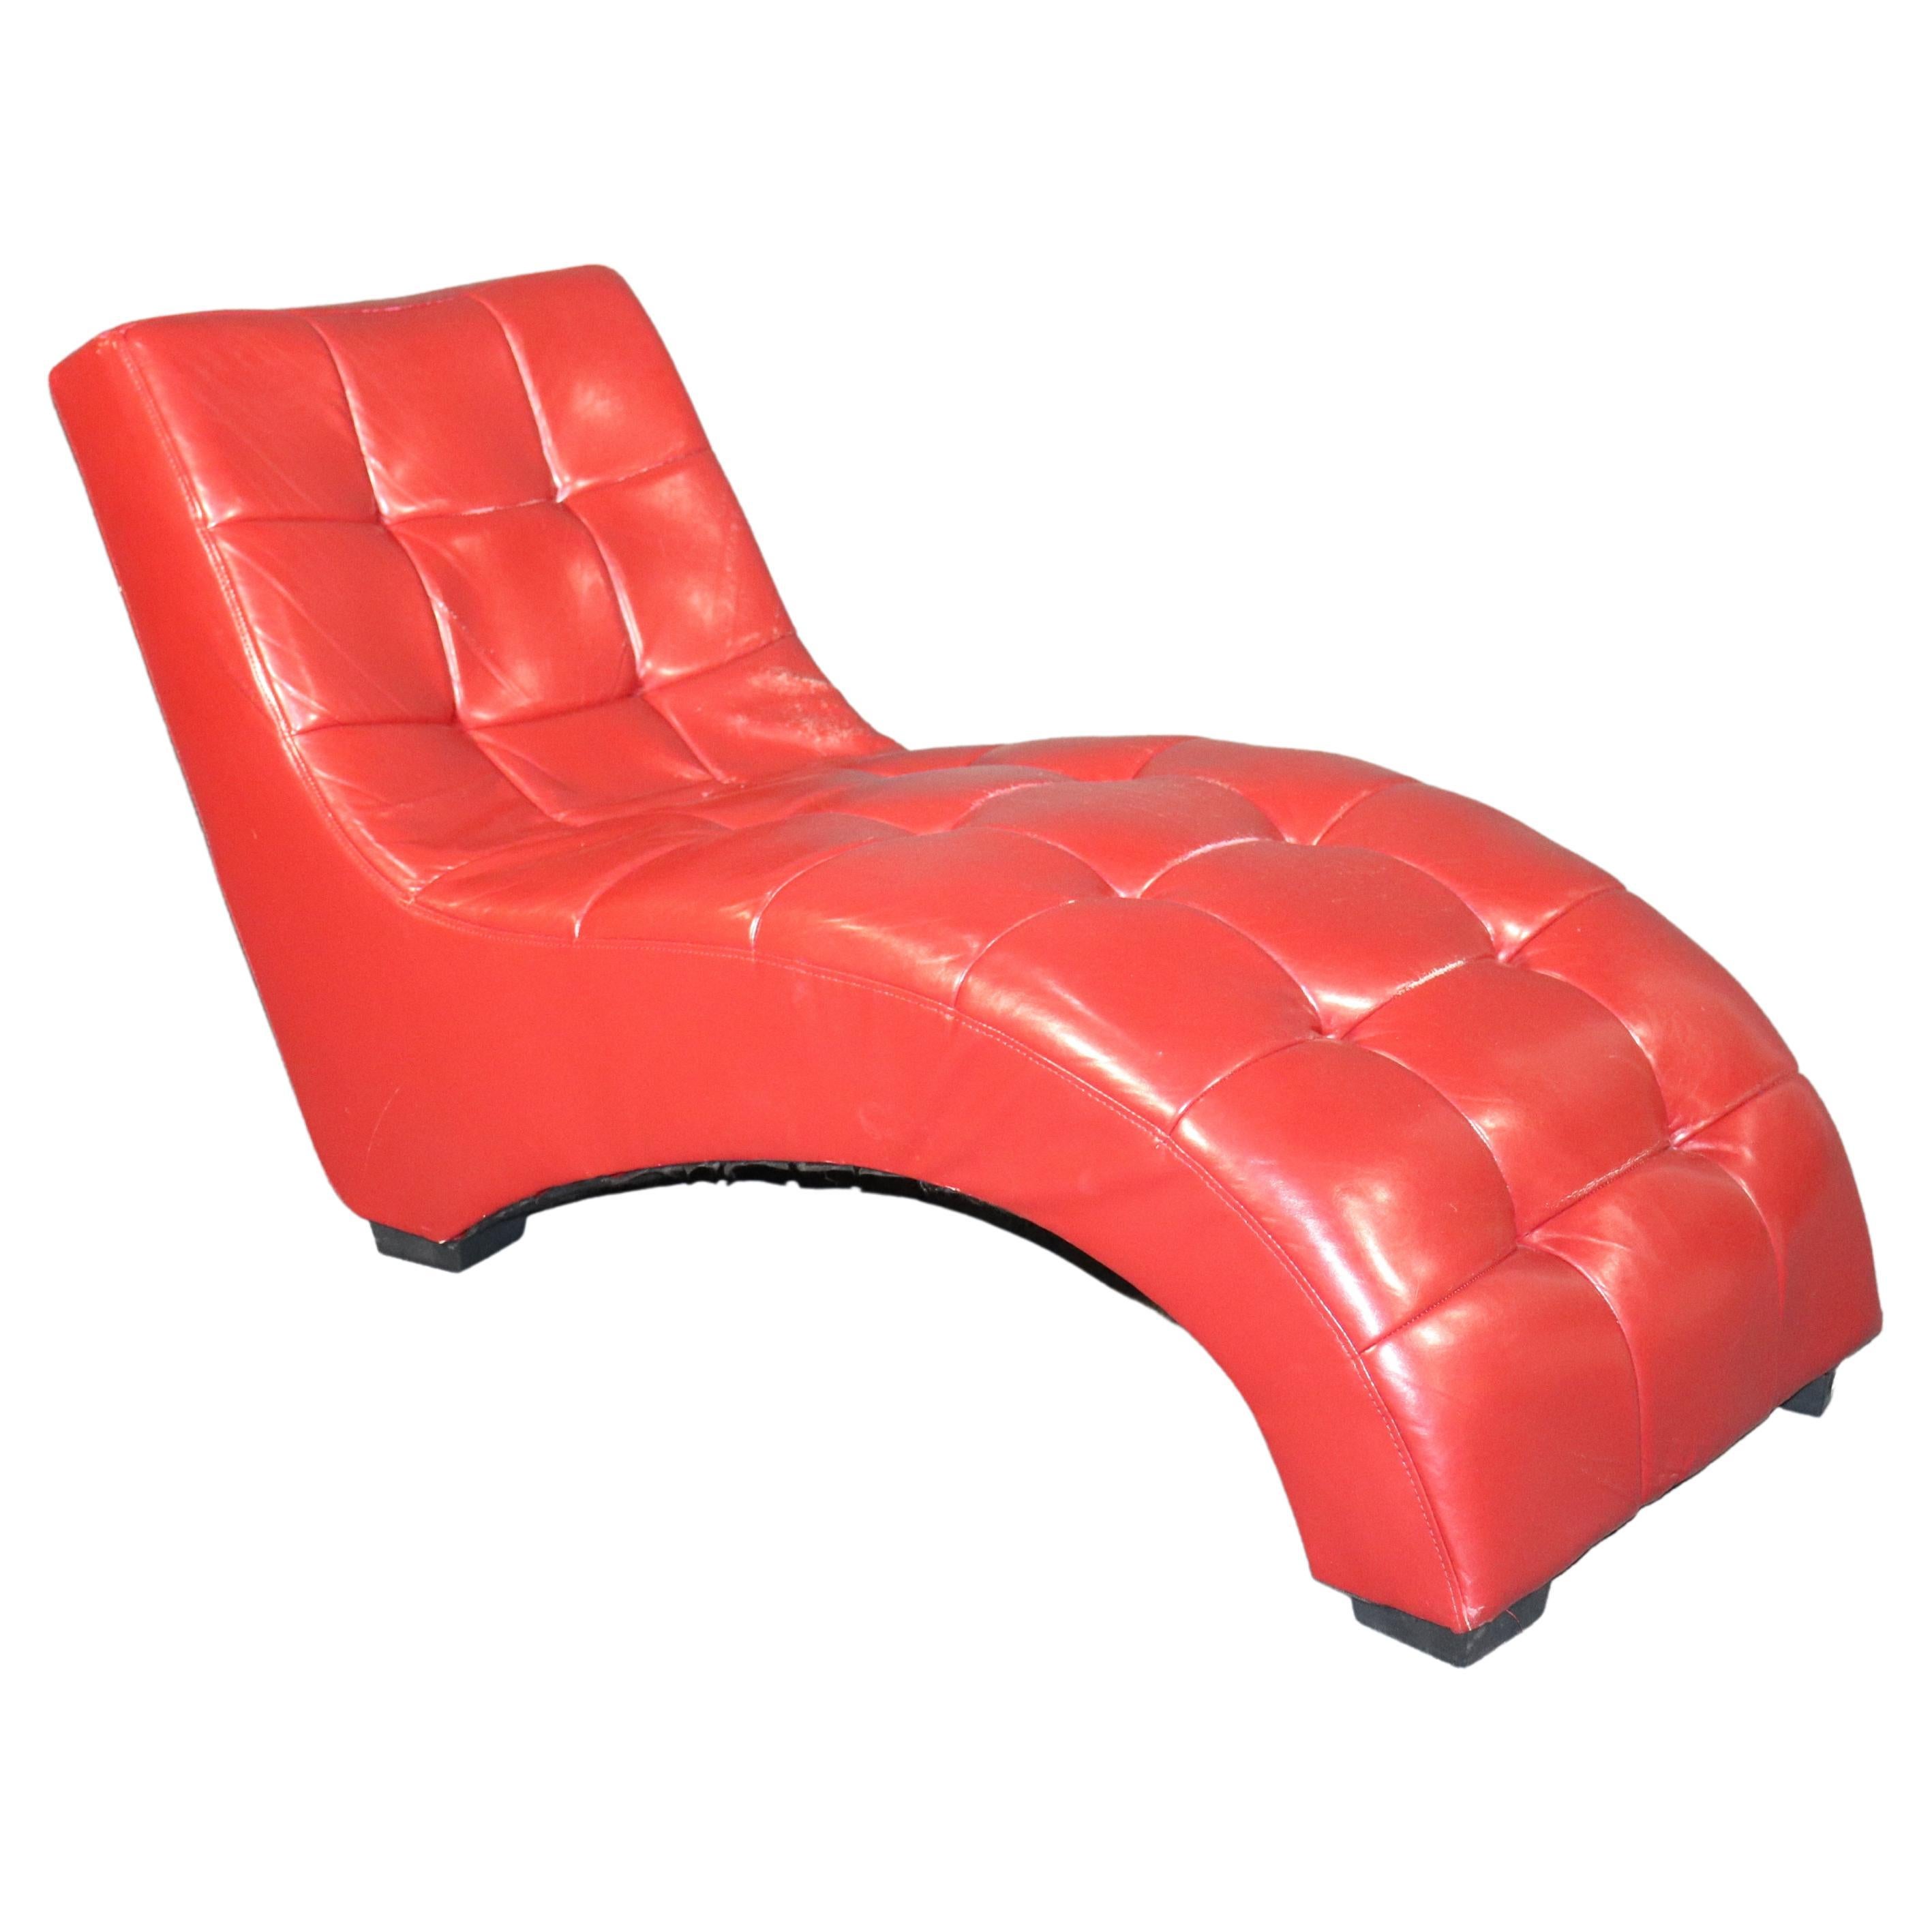 Leather Chaise Lounge